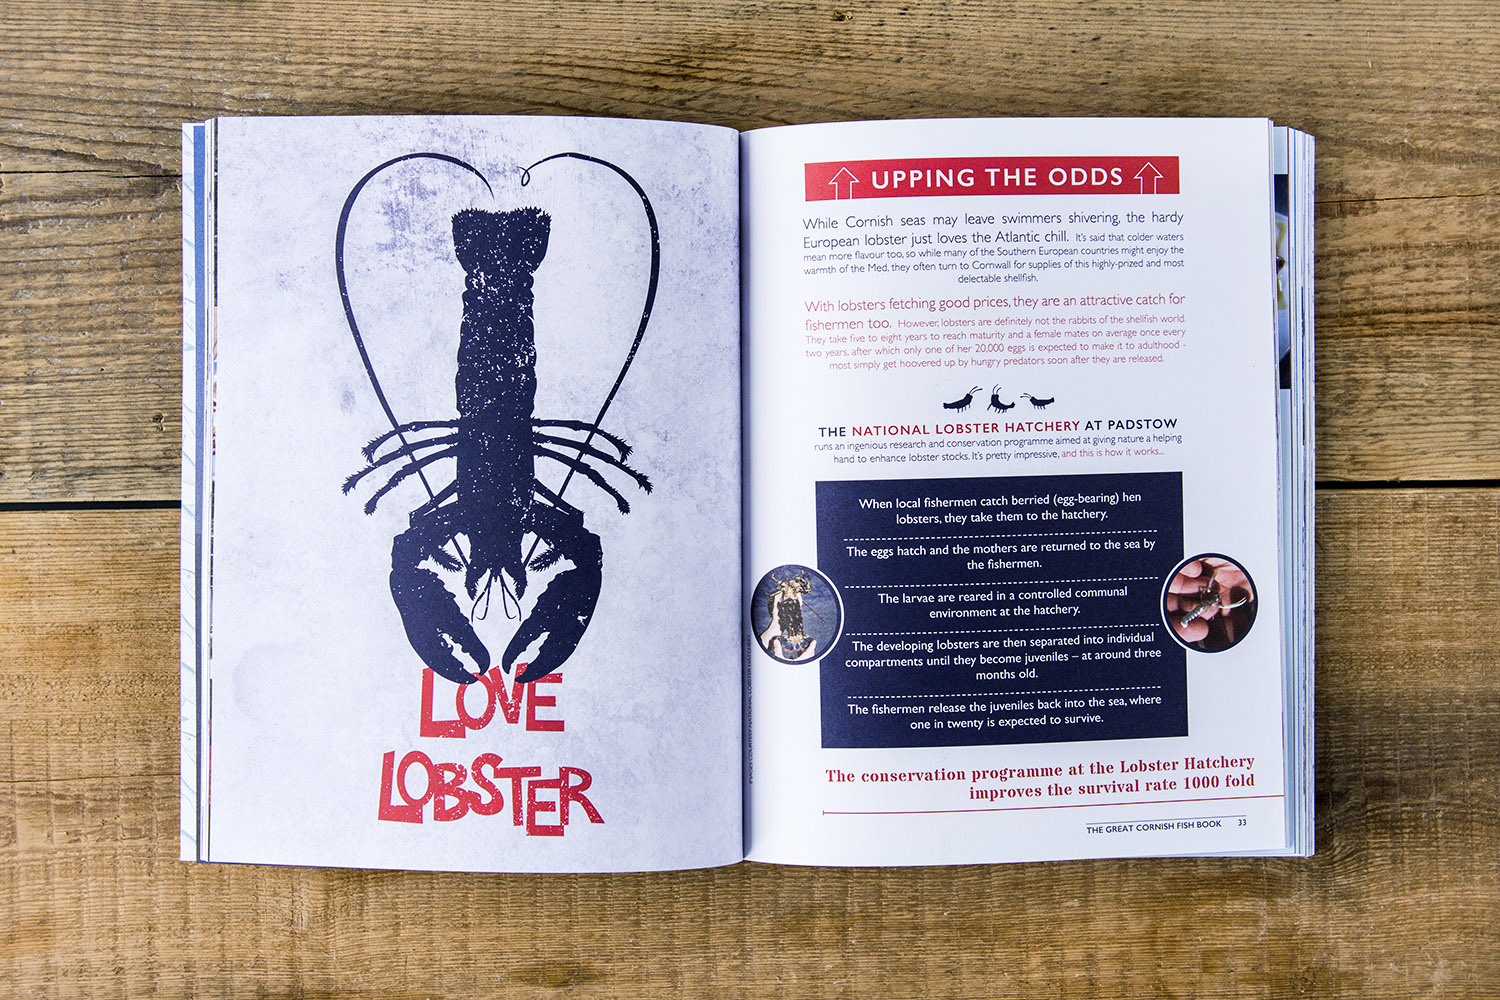 Layout design of the Great Cornish Fish Book